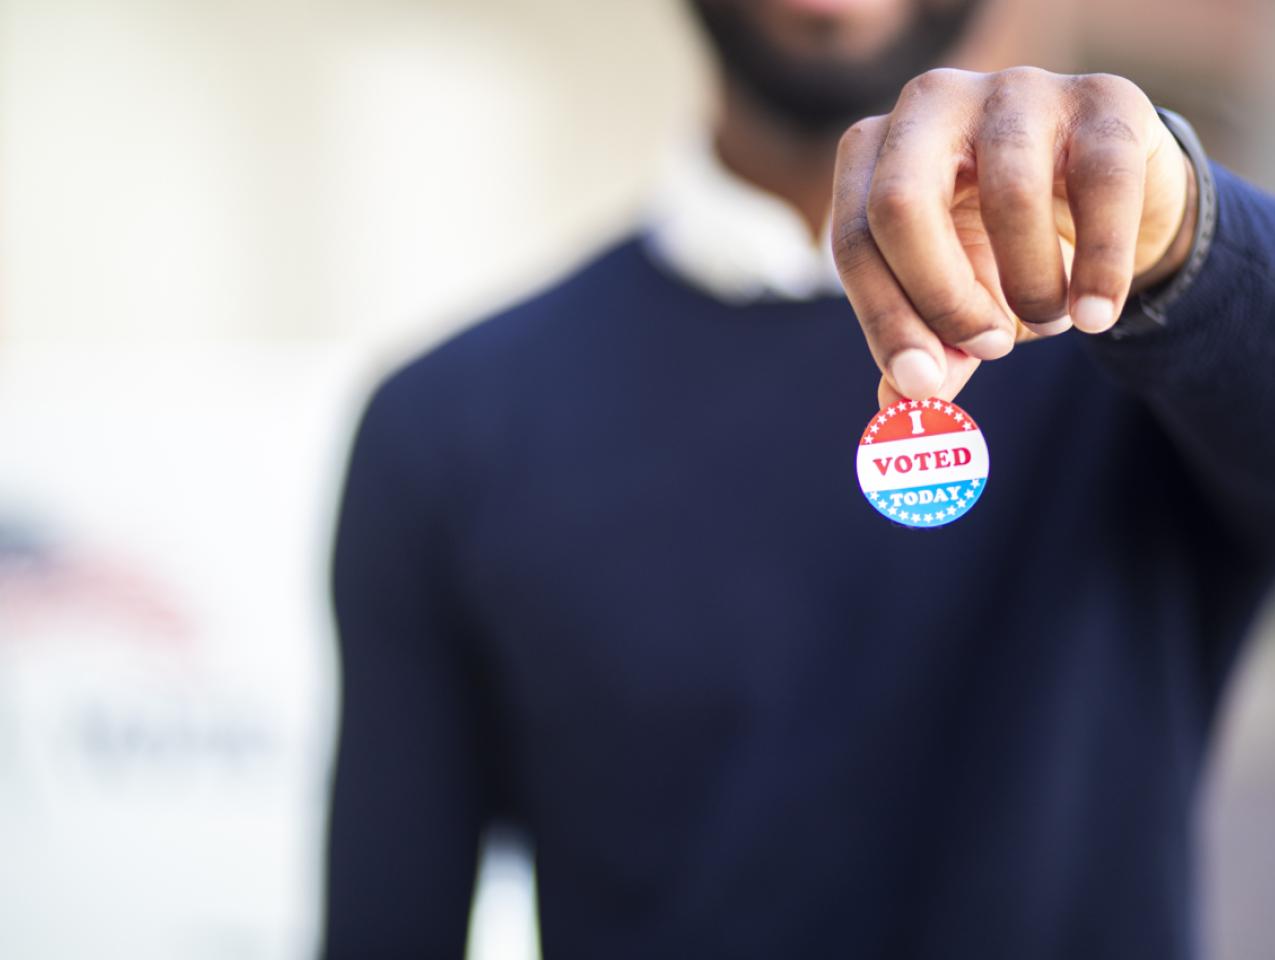 Young Black Man with I voted Sticker stock photo